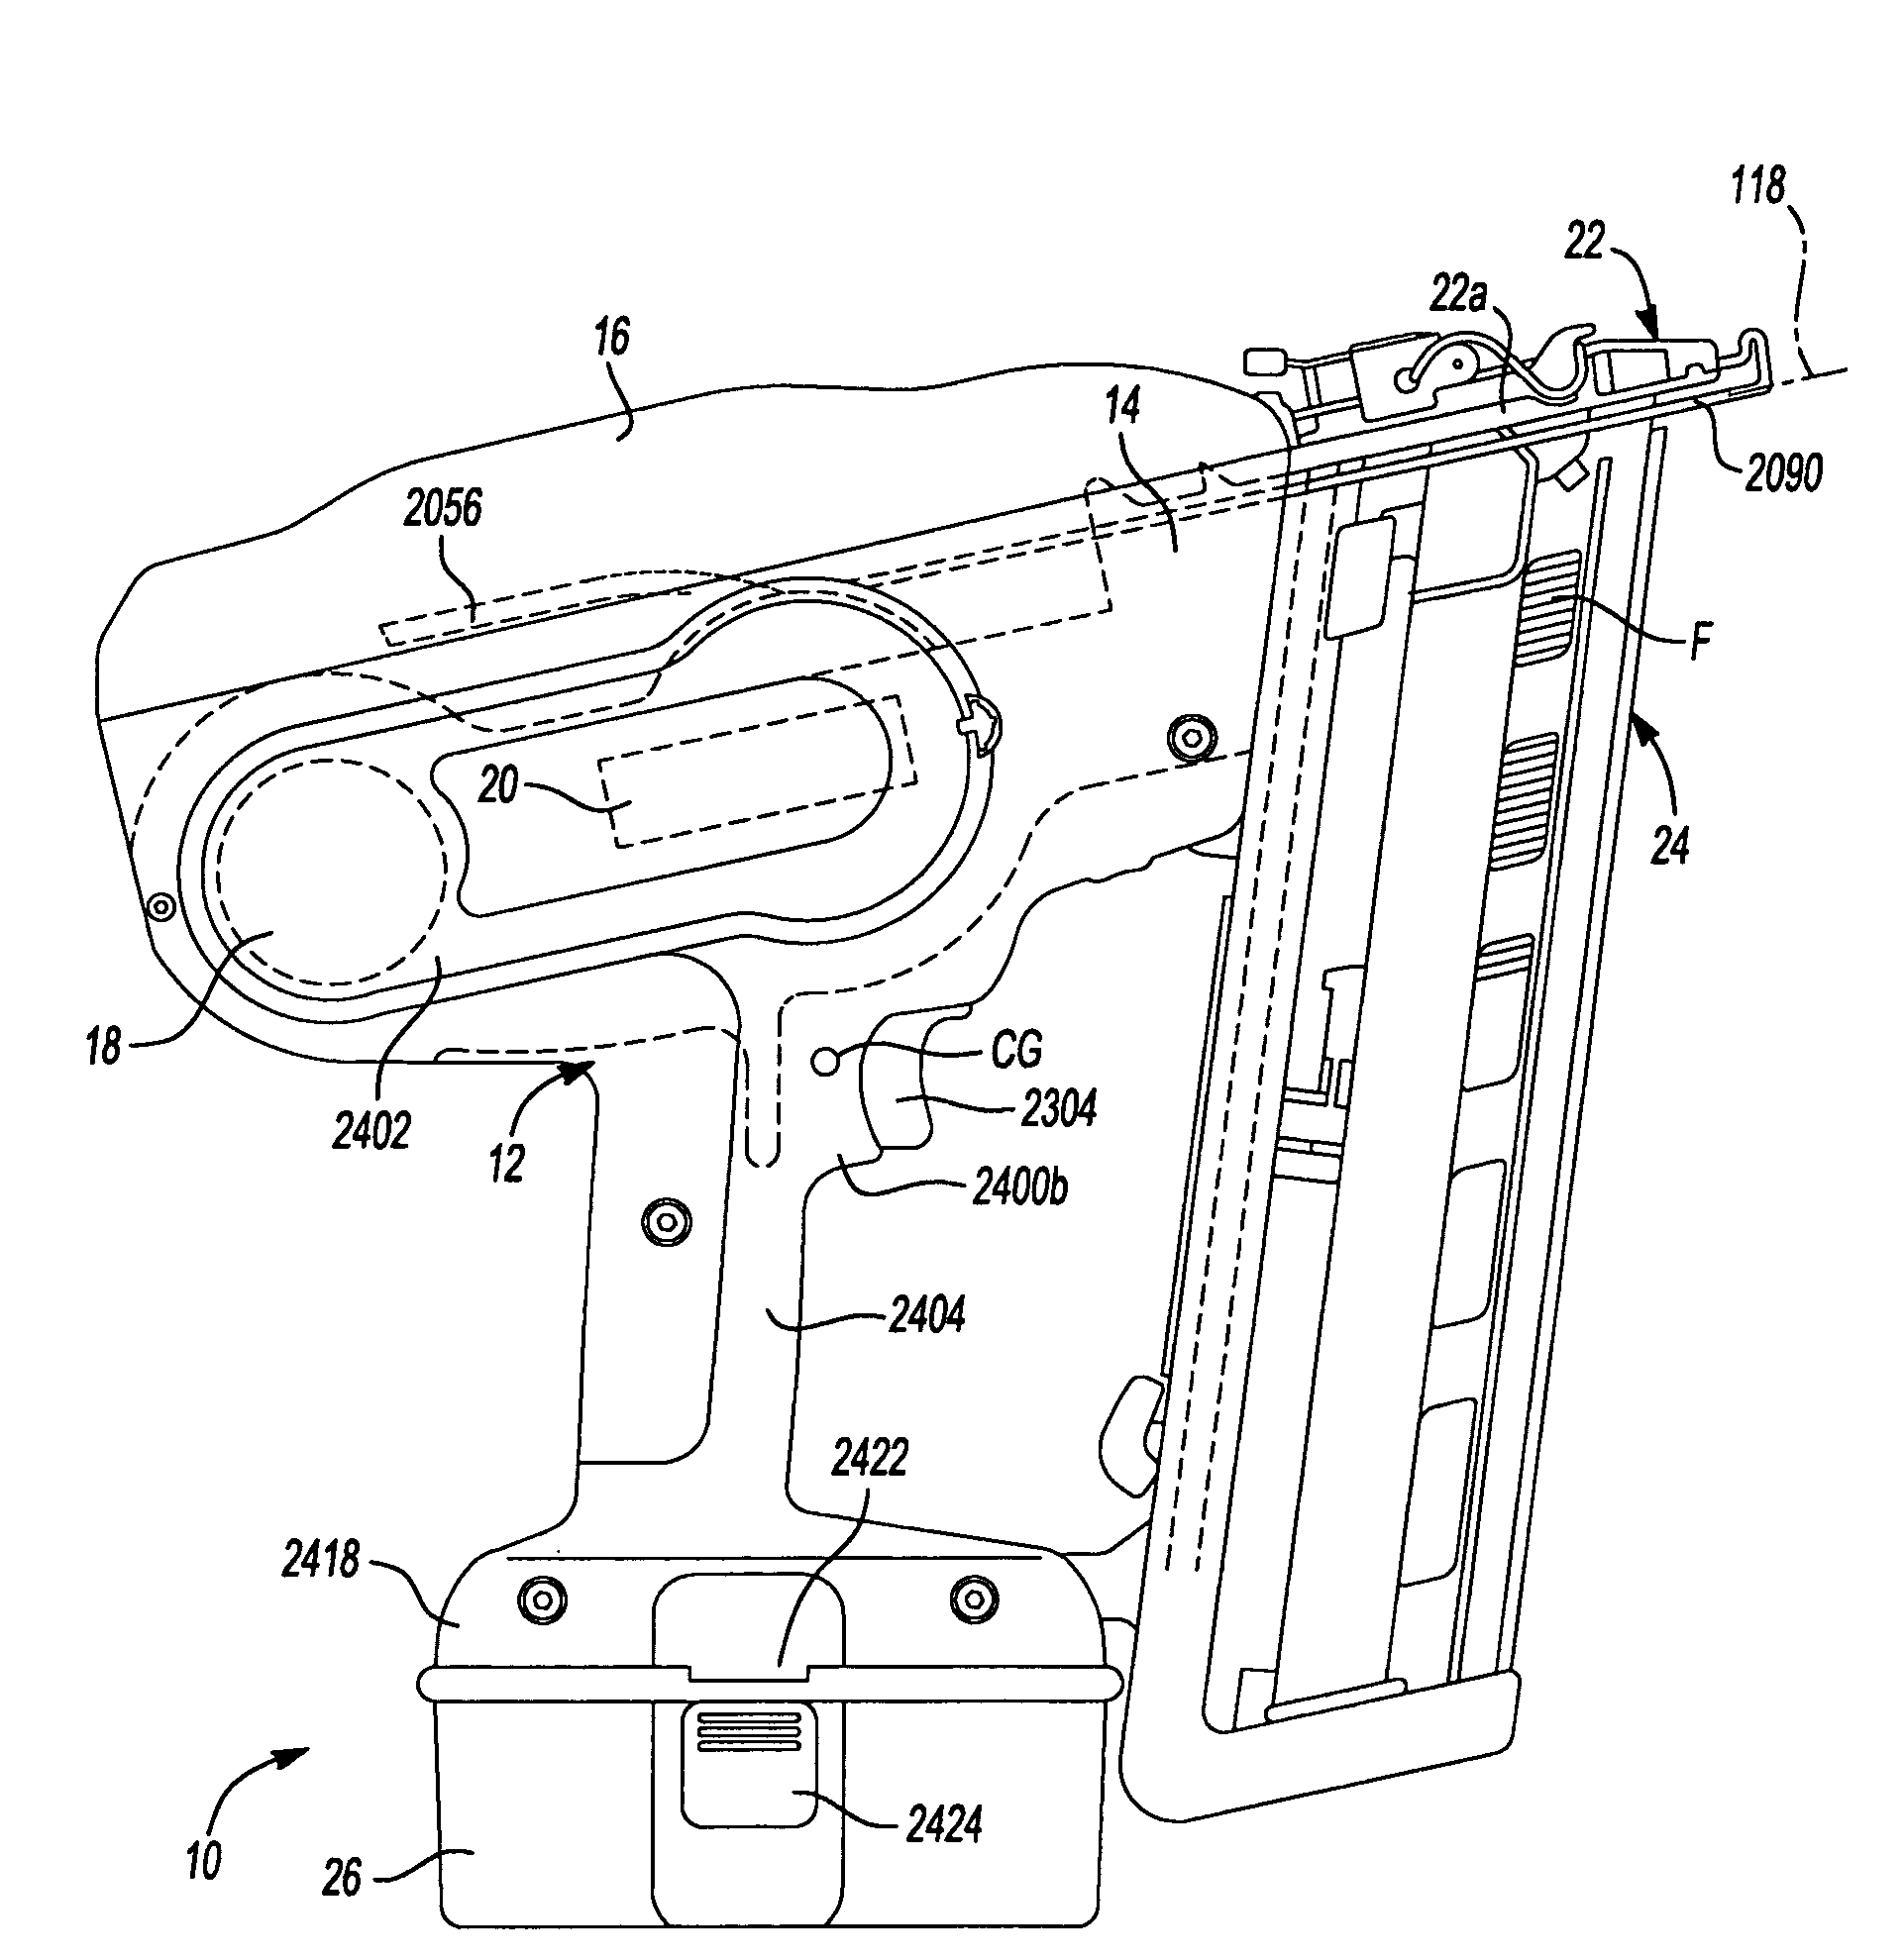 Electric driving tool with driver propelled by flywheel inertia